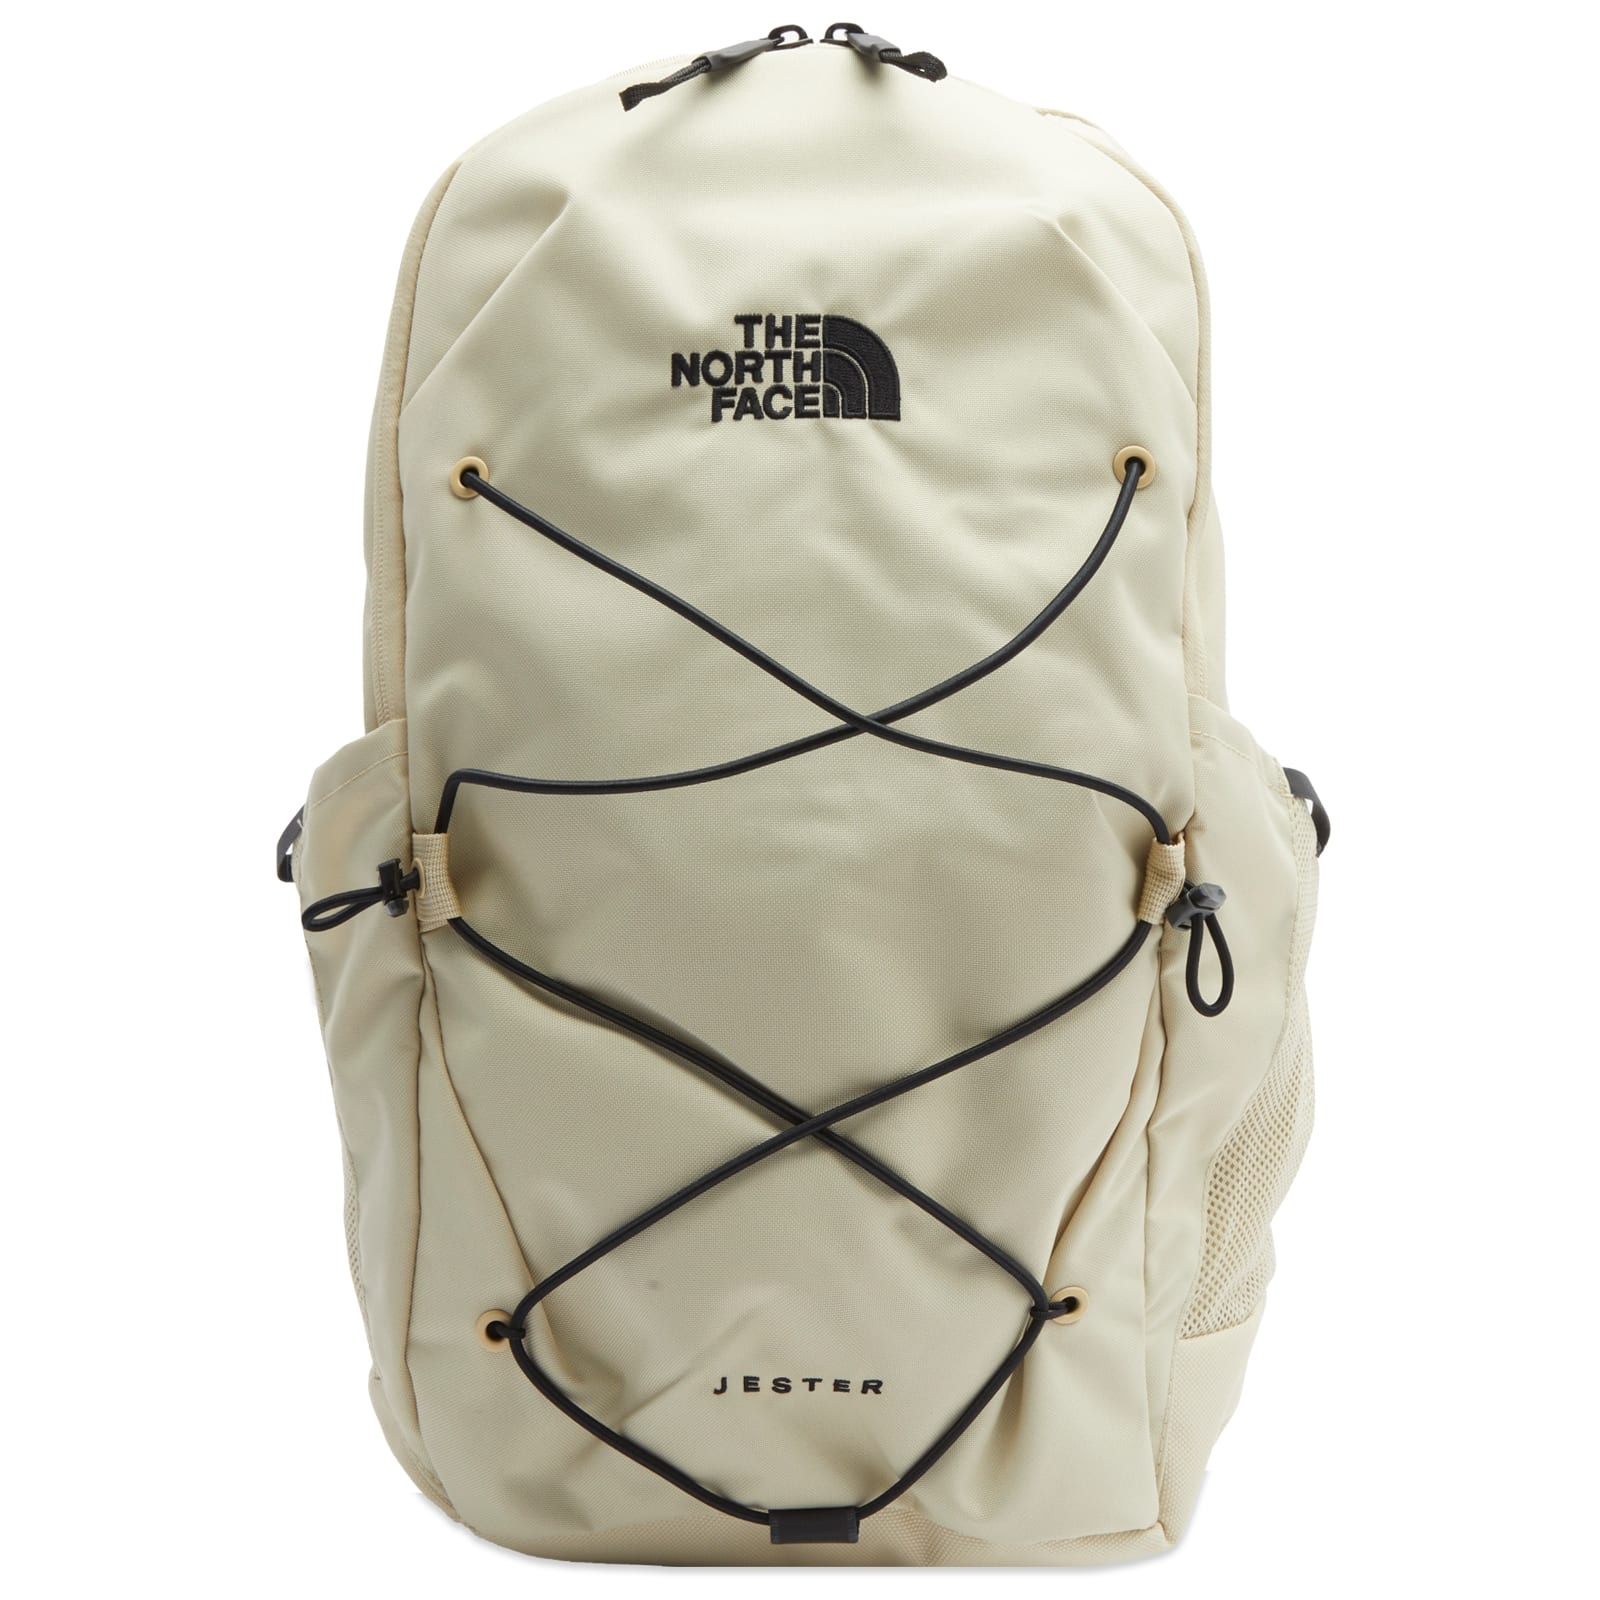 The North Face Jester Backpack - 1